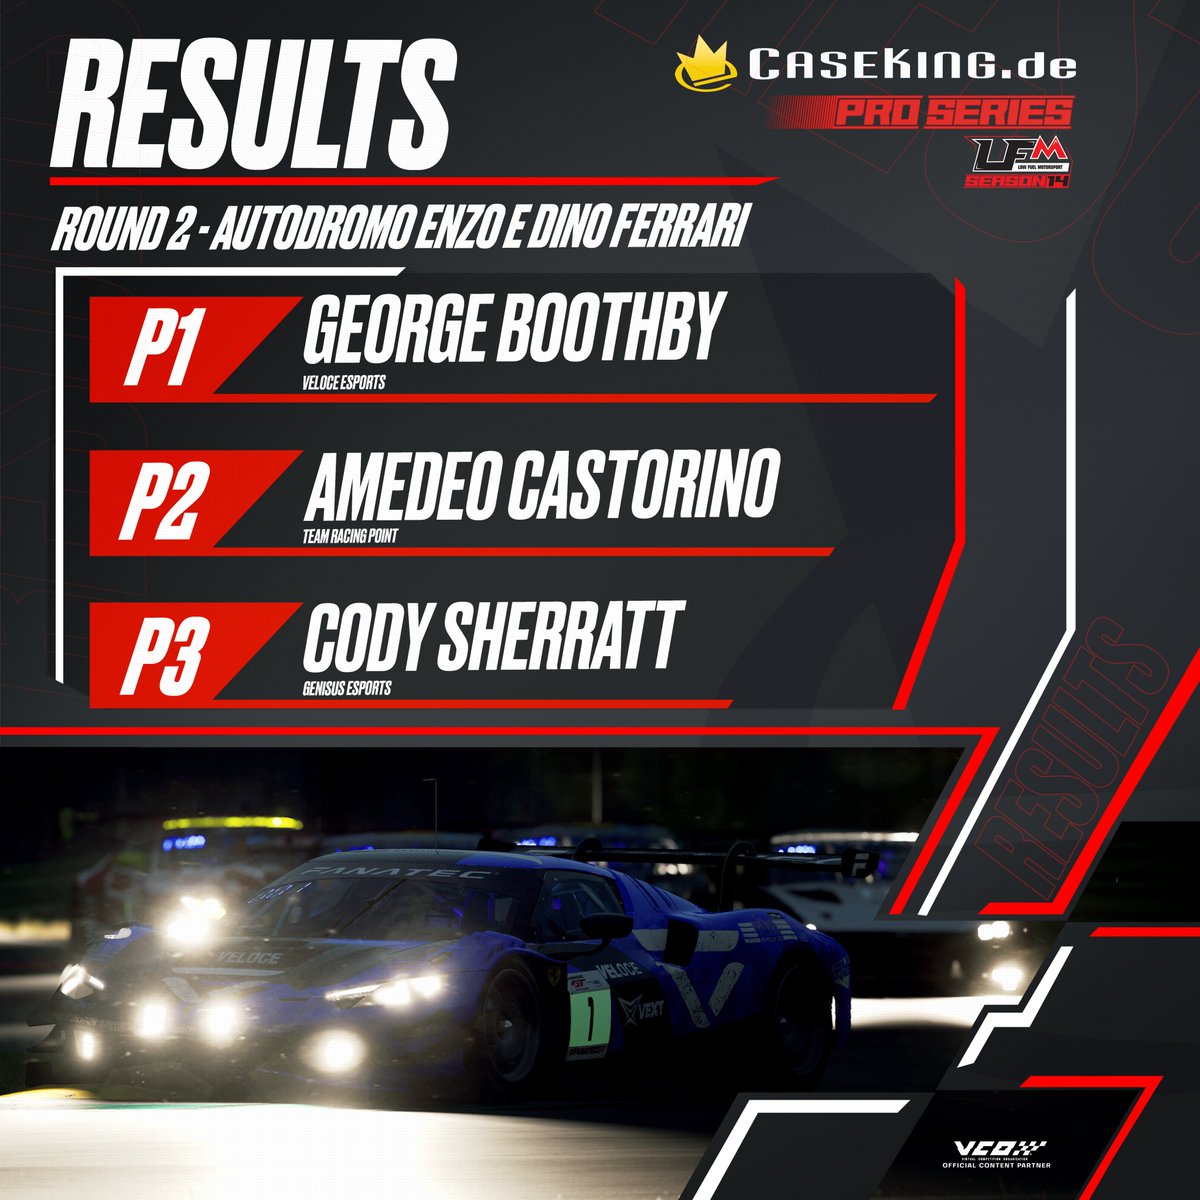 Win #2 in race #2 for George Boothby in the @Caseking PRO Series last week. @ukogmonkey makes it to the top of the podium with a great performance from P5 in qualifying. @amedeo2304 goes even stronger and makes it from P10 to P2 in the race after a mediocre qualifying.